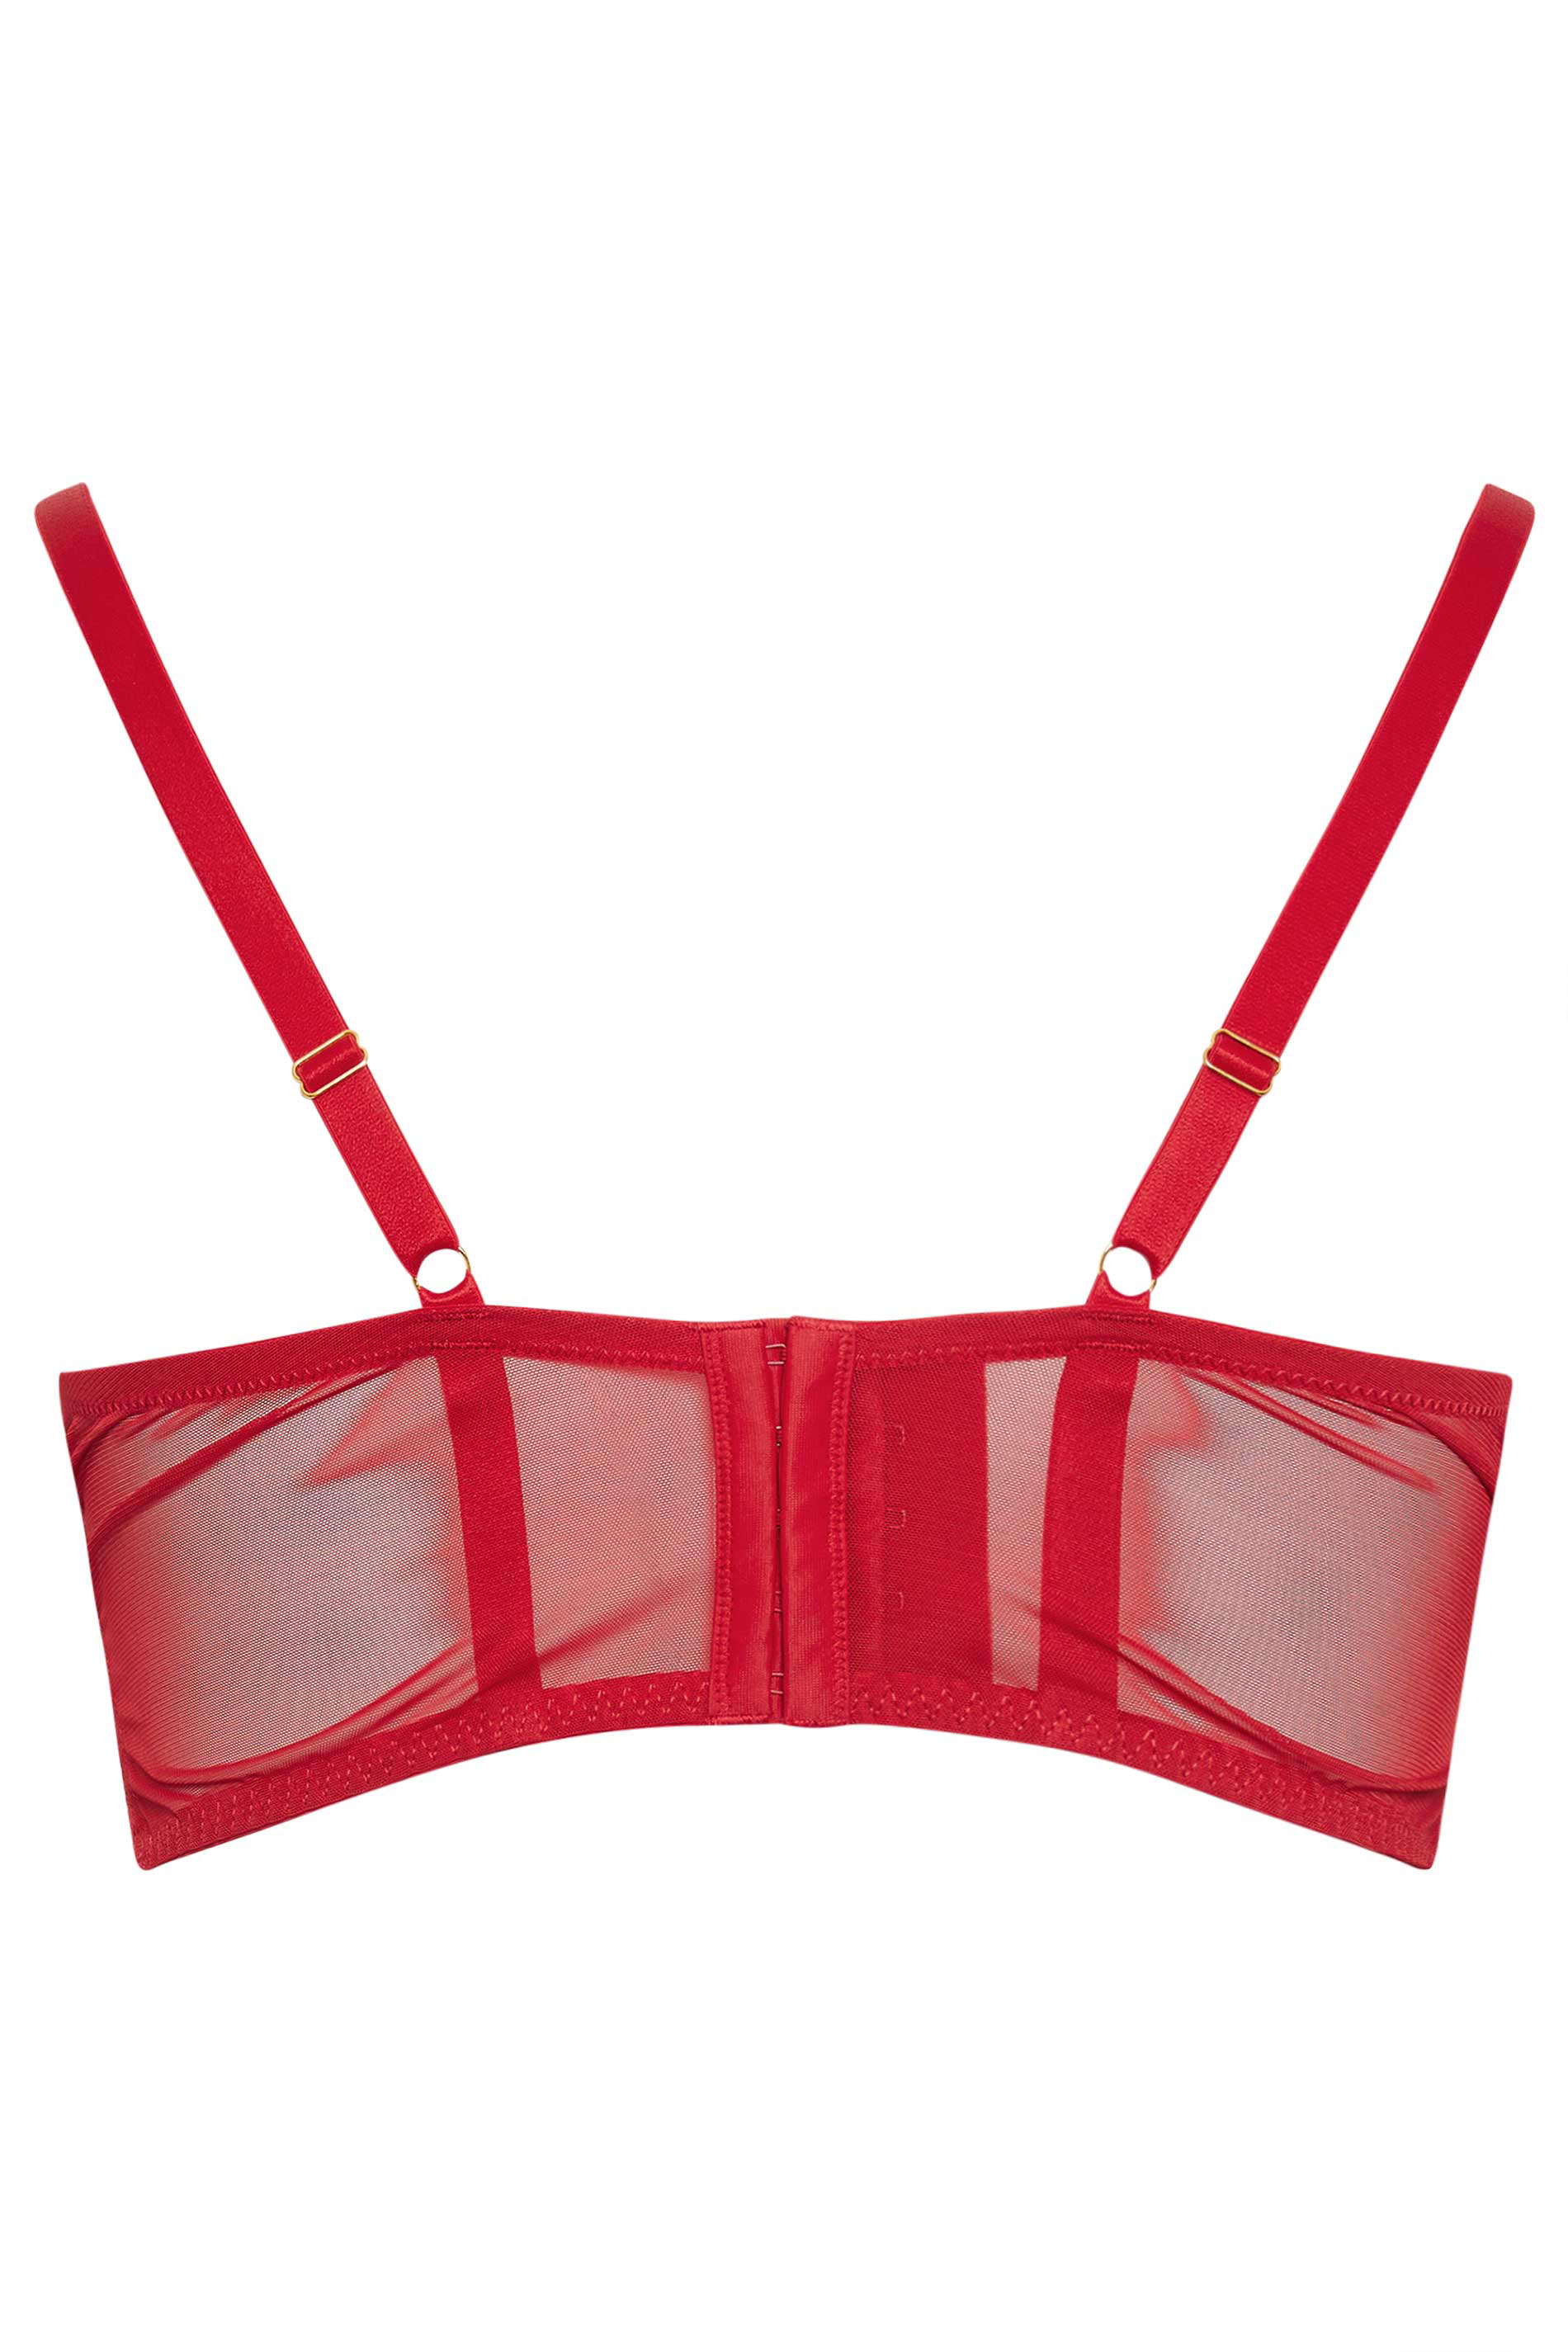 YOURS Plus Size Red Lace Strap Detail Padded Longline Bra